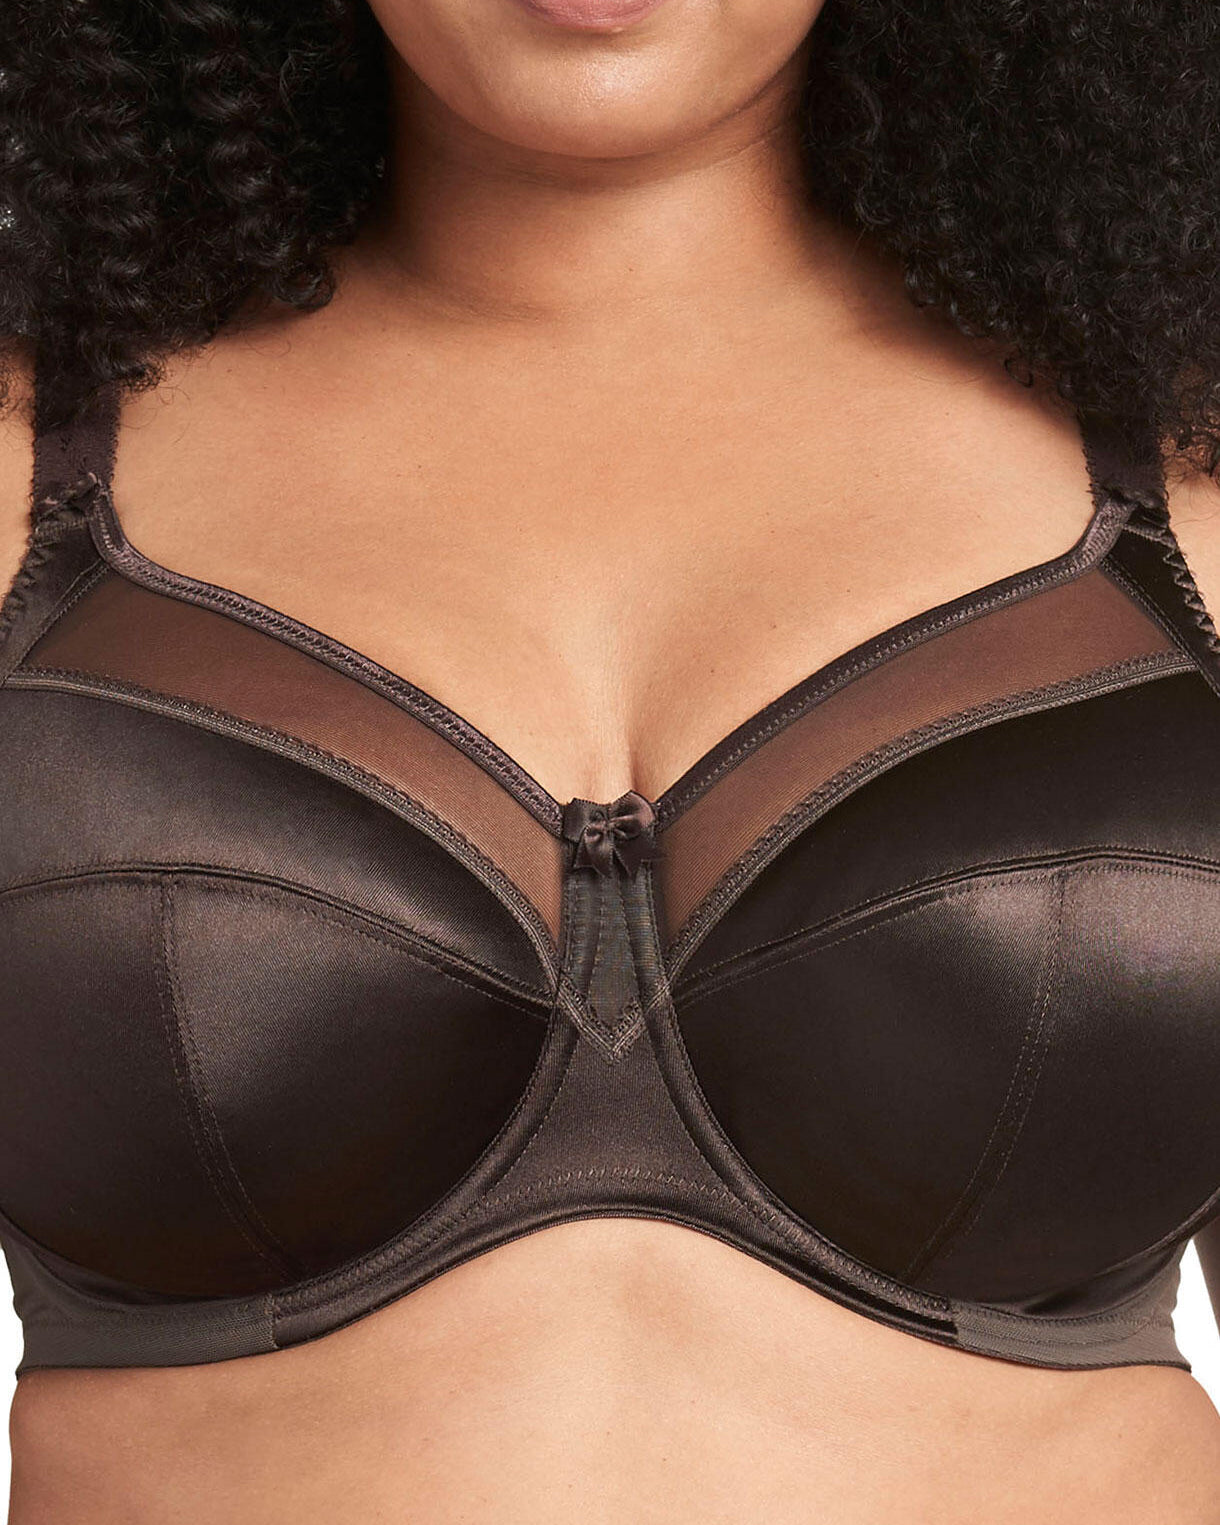 Model wearing a cut and sew underwire banded bra in chocolate brown